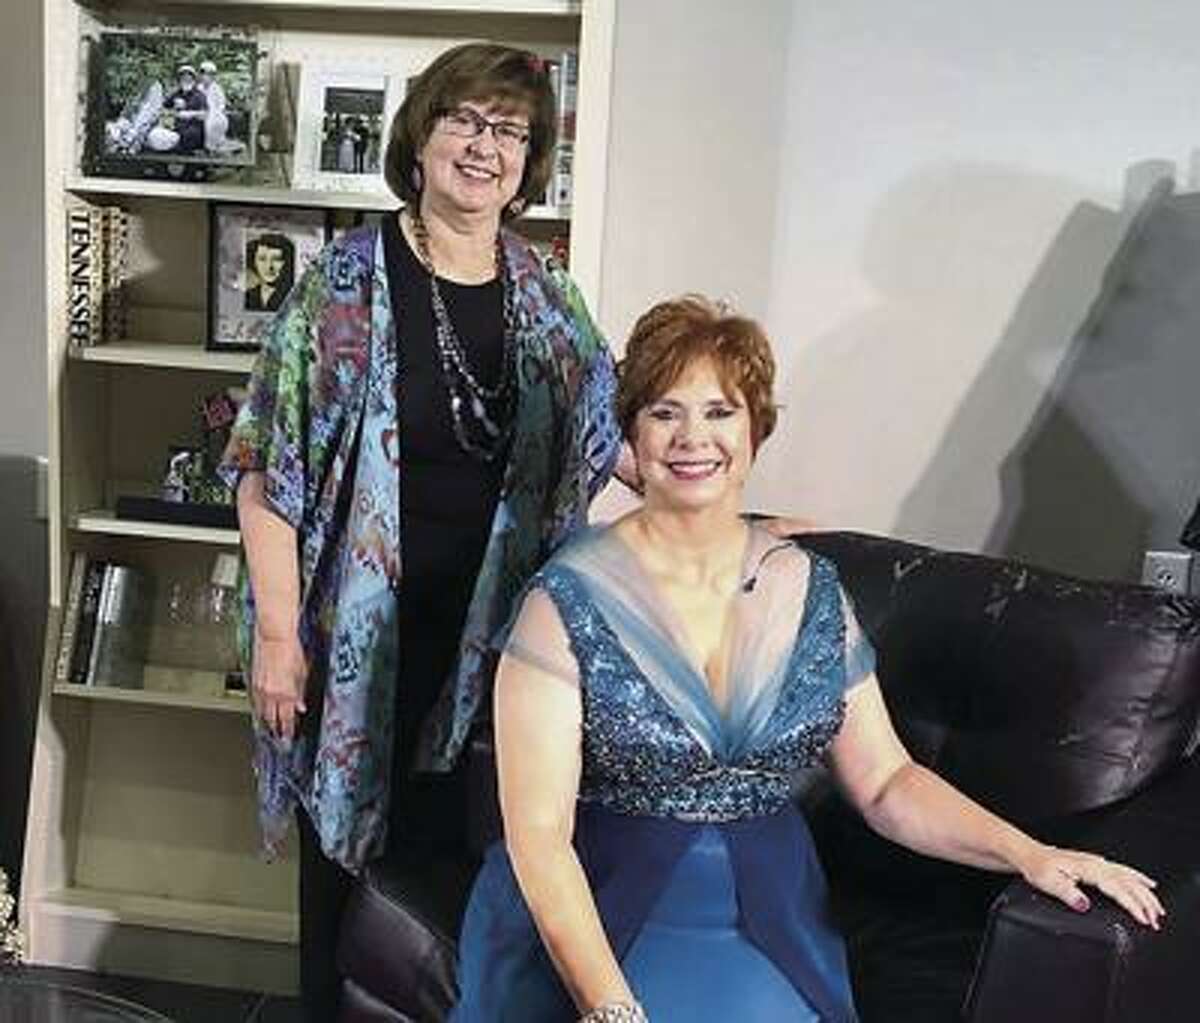 Joan Burr (standing) and Nina Cathey Allbert perform at the Thomaston Opera House Sept .6-7 and Sept. 13-14.